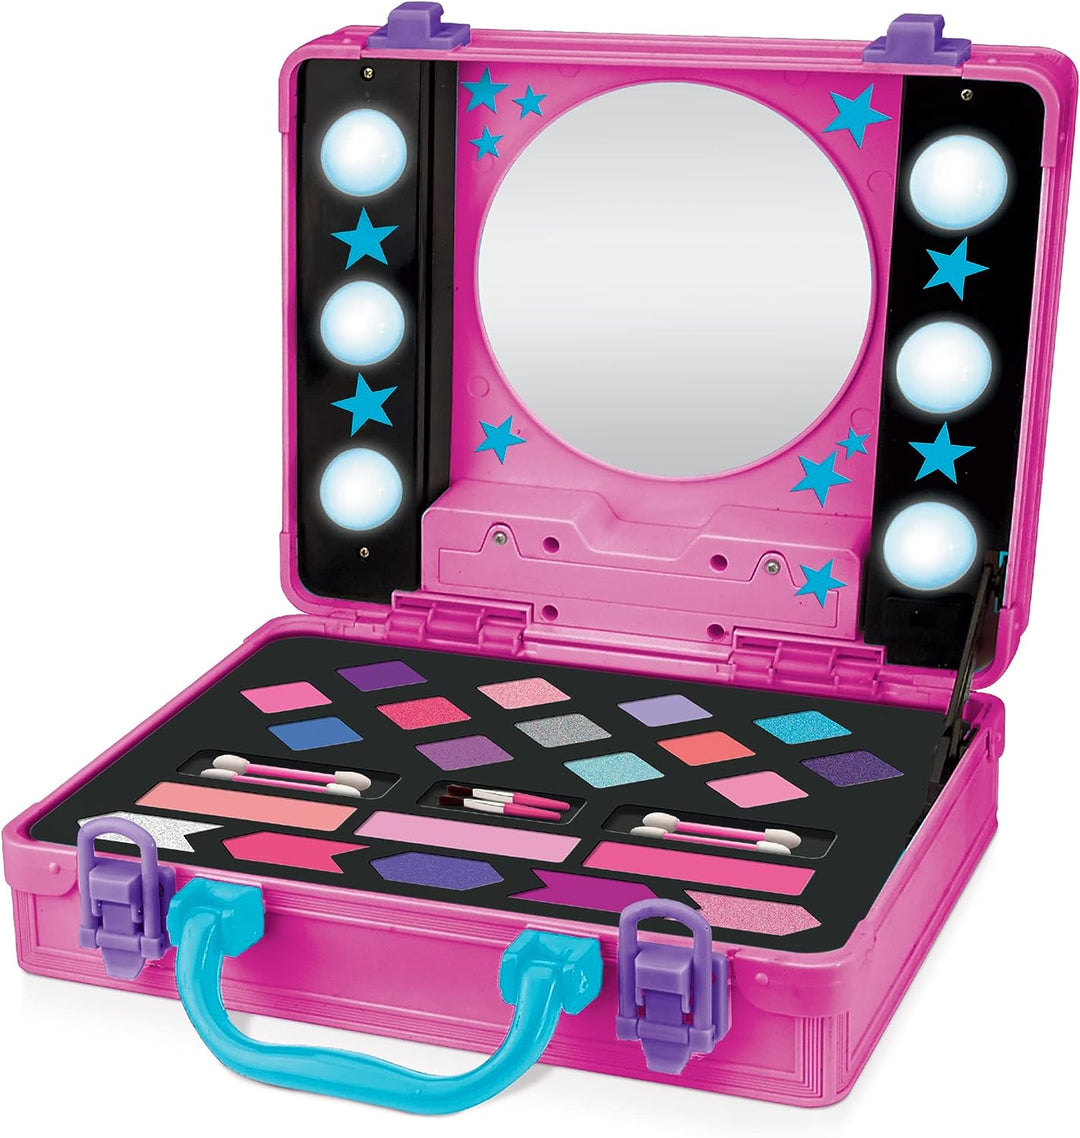 Shimmer and Sparkle 17362 Shimmer N Sparkle Light up Beauty Pink case for Children with Hollywood Style Lights Real Washable Make up for Kids